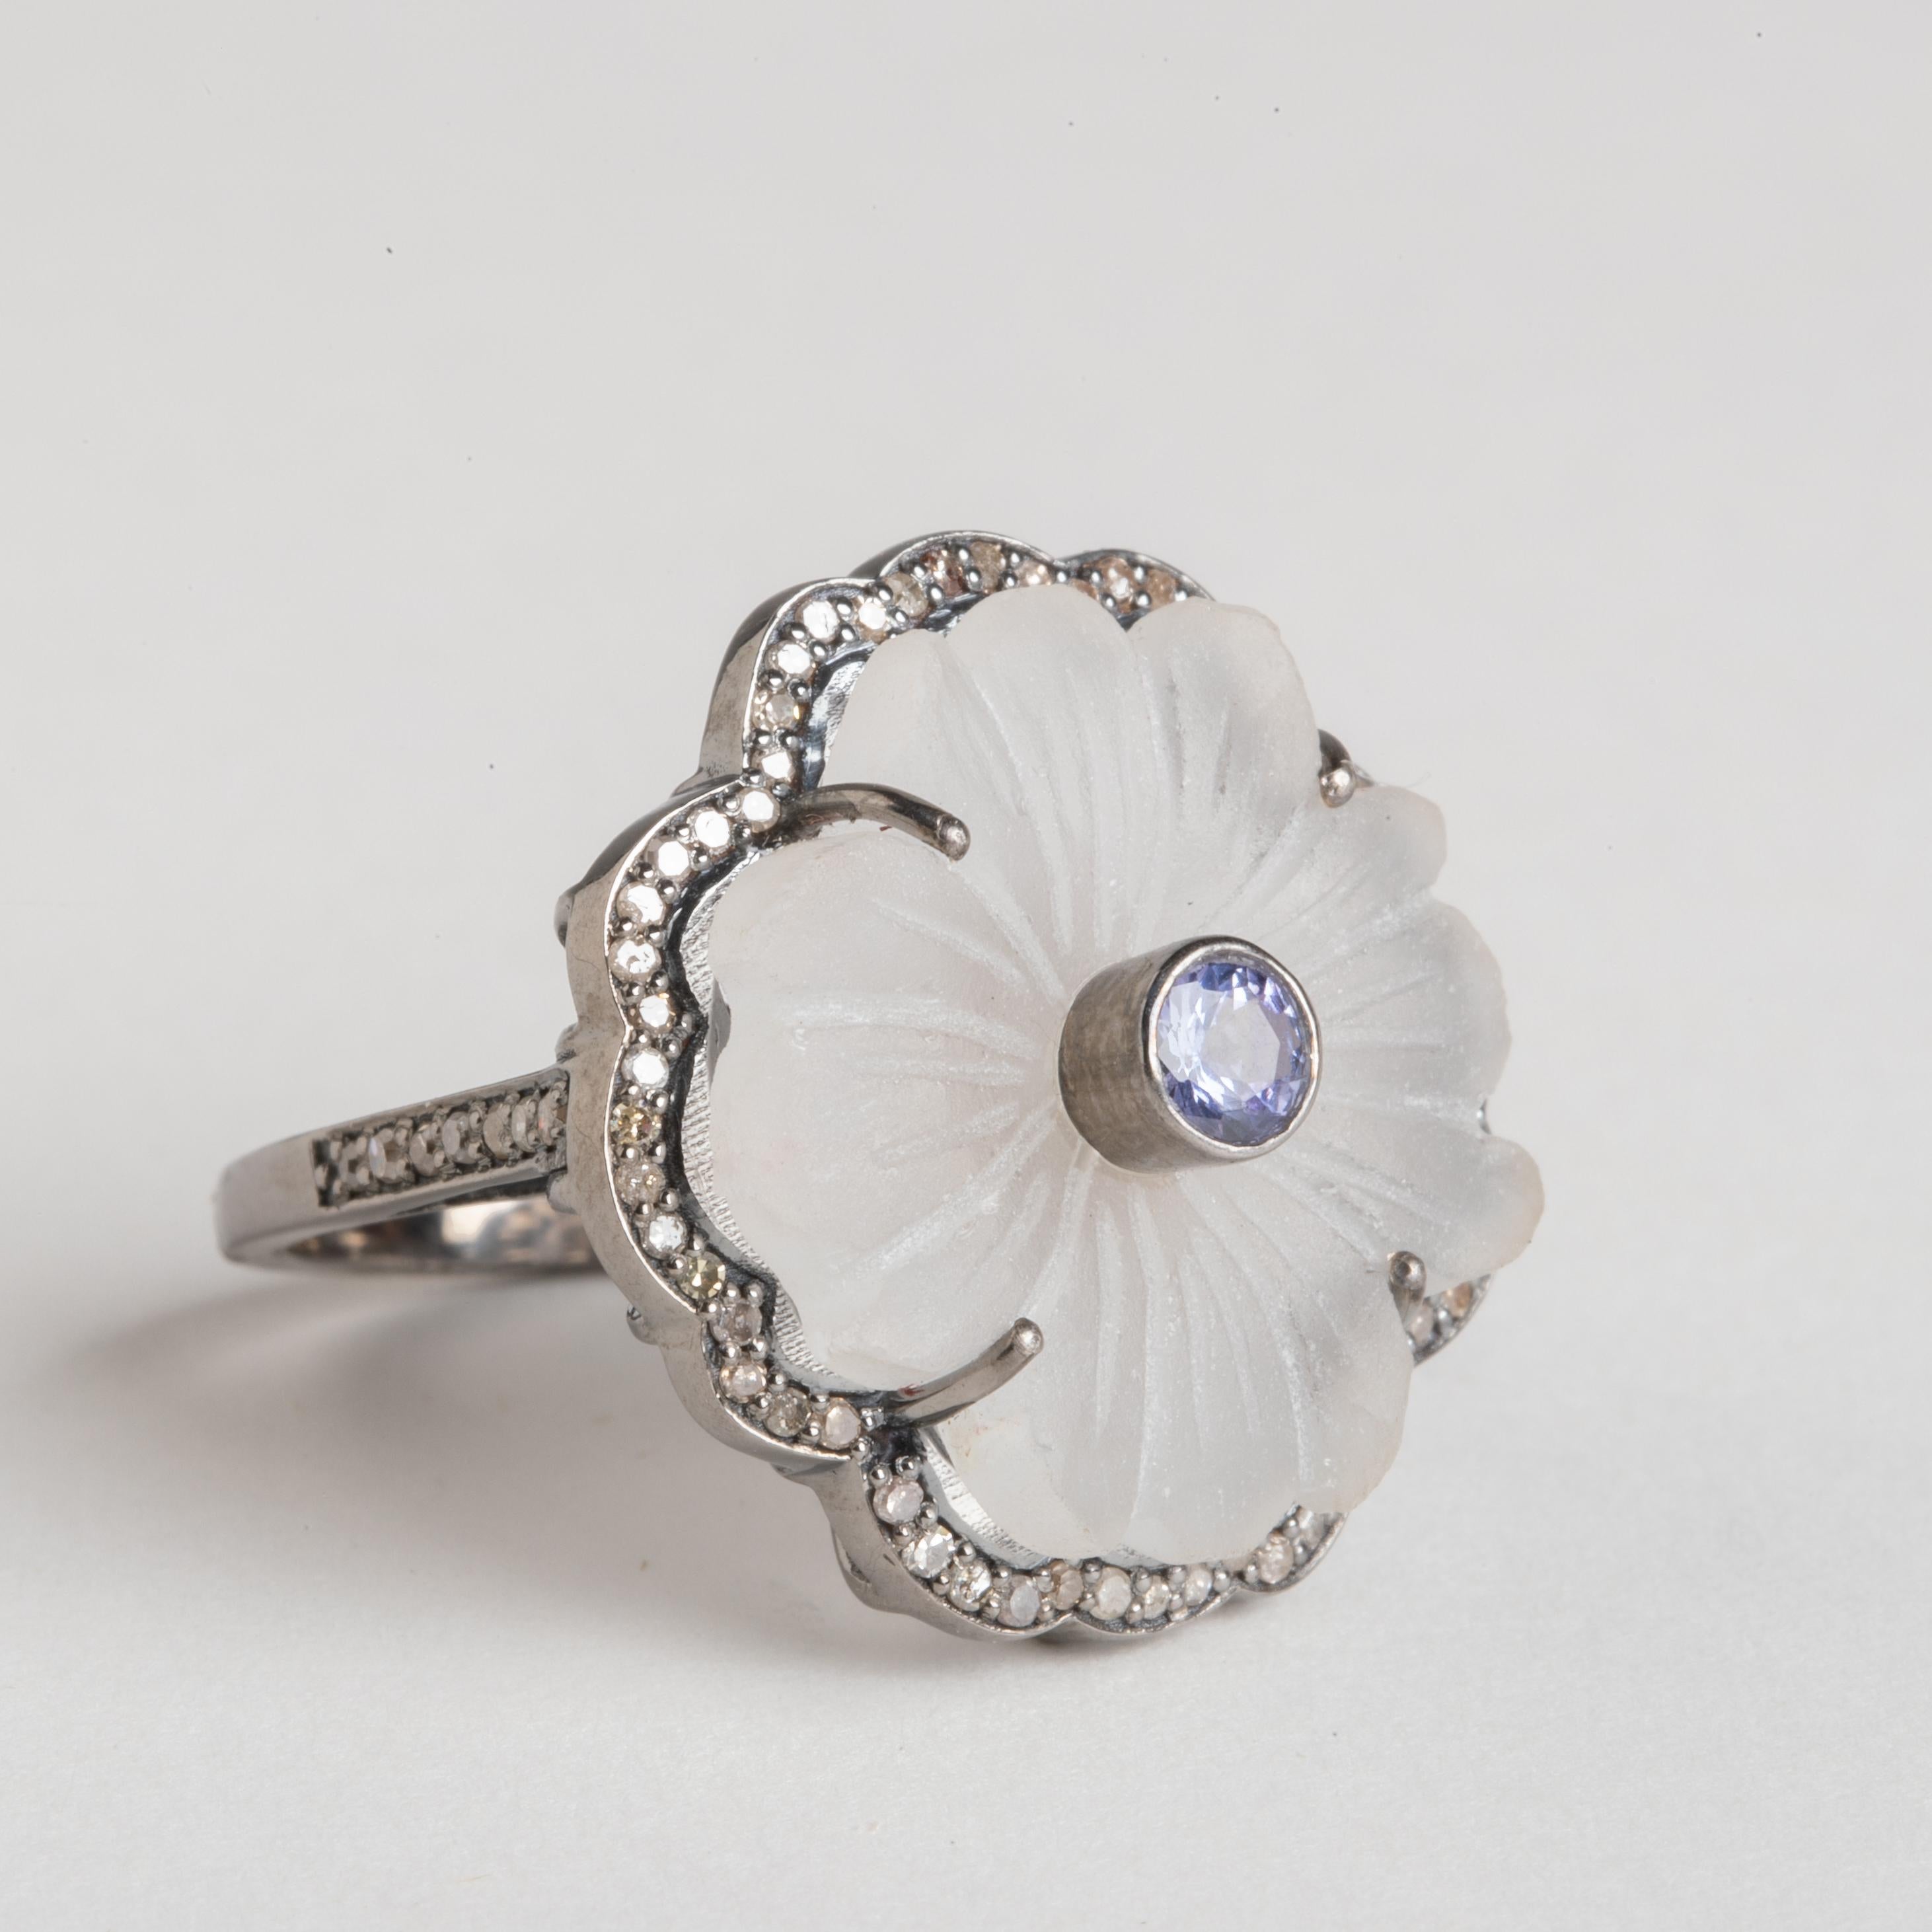 A carved floral crystal with a faceted tanzanite center stone.  Bordered with round, brilliant cut diamonds in a pave` setting.  All set in an oxidized sterling silver.  Diamonds along the side of the band as well.  Weight of crystal and tanzanite